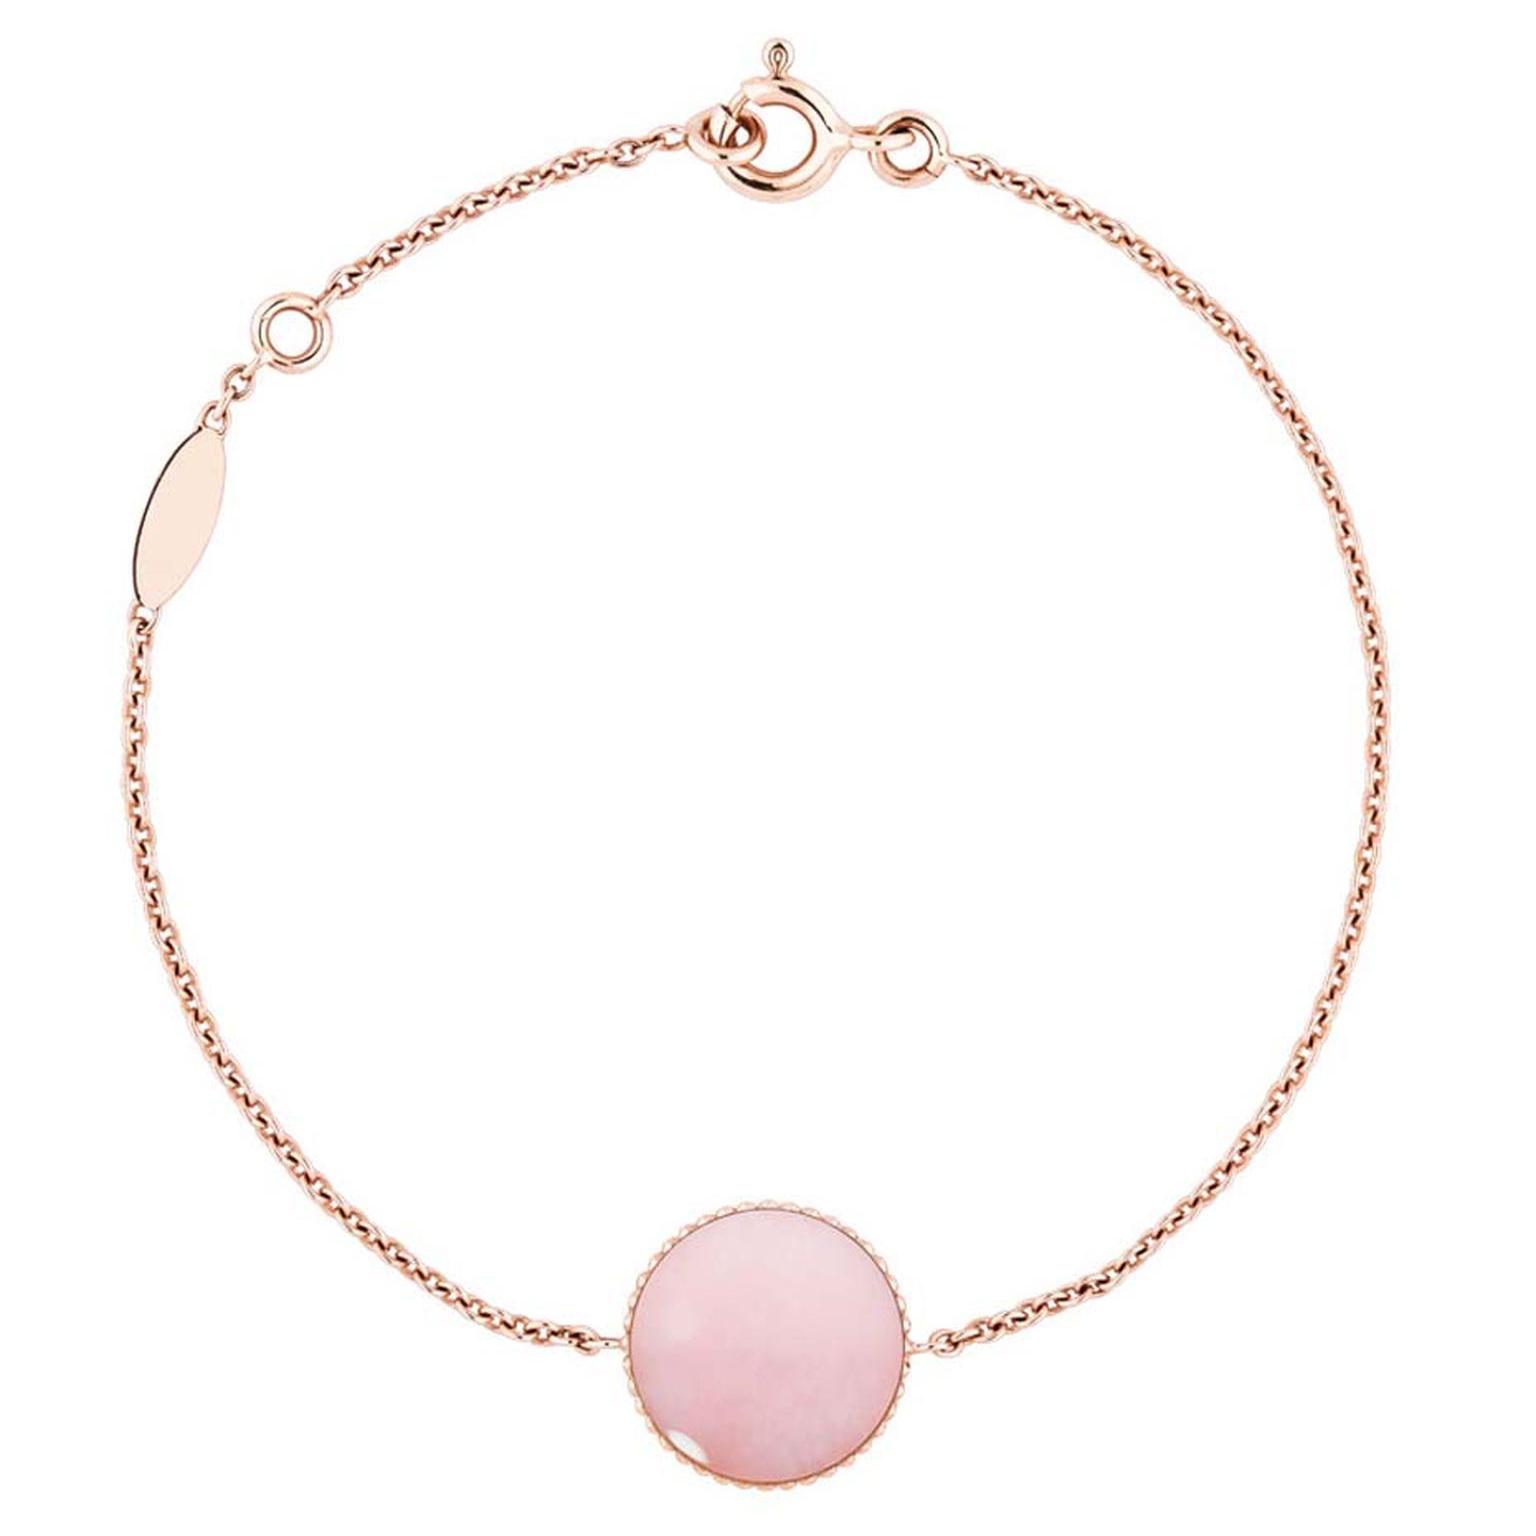 The rosy hue of the pink opal can be seen clearly on the reverse of the Dior Rose des Vents medallion.